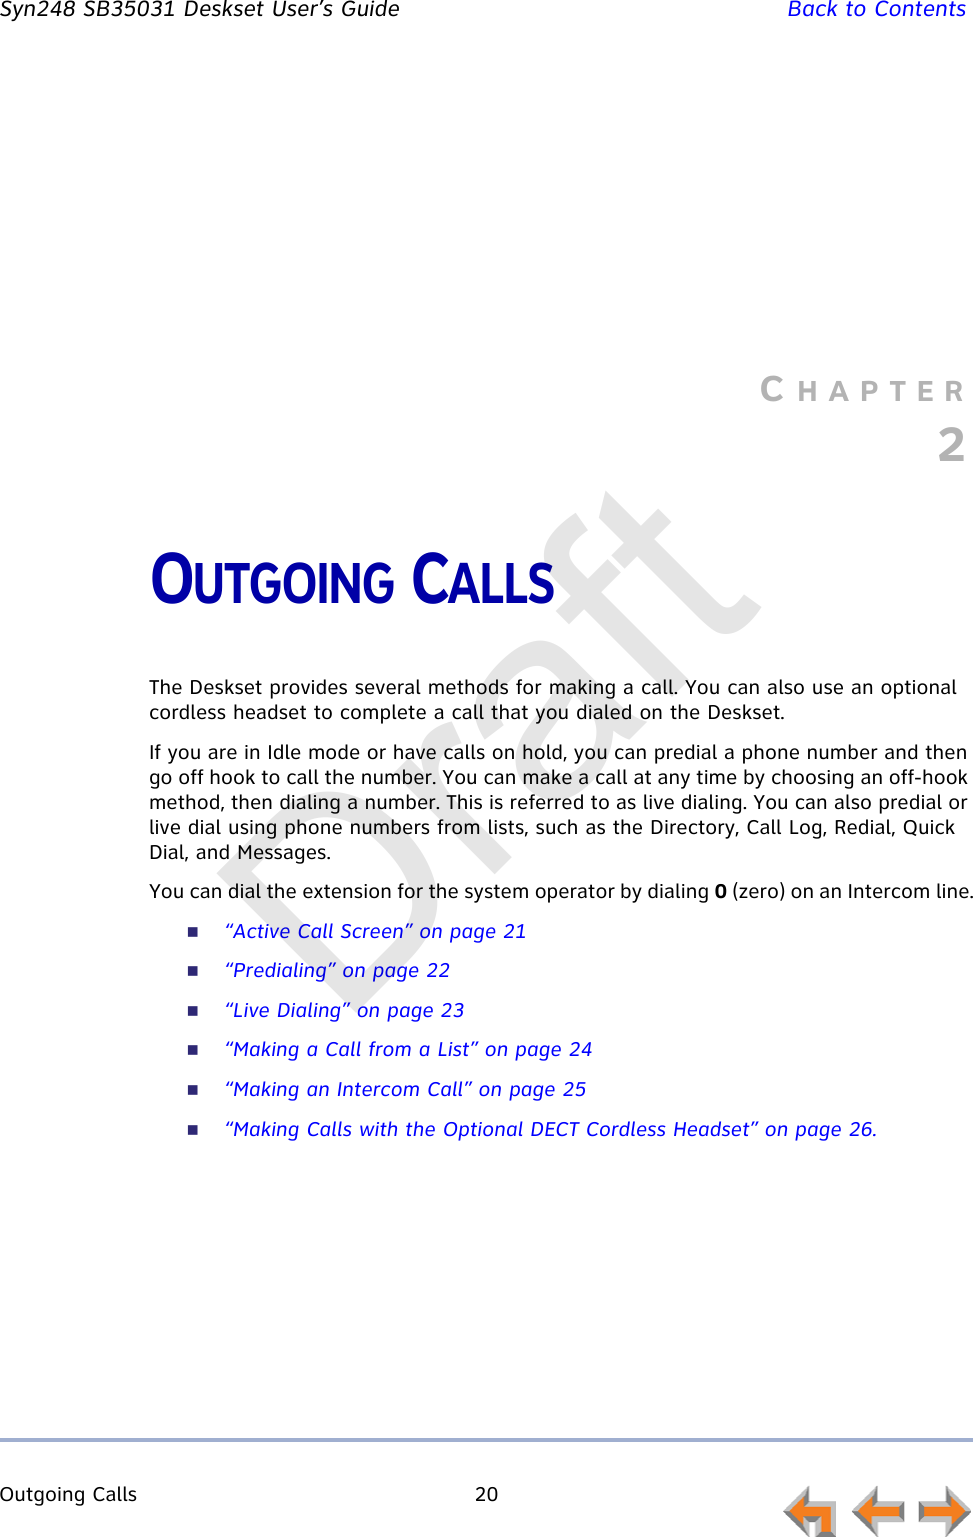 Outgoing Calls 20         Syn248 SB35031 Deskset User’s Guide Back to ContentsCHAPTER2OUTGOING CALLSThe Deskset provides several methods for making a call. You can also use an optional cordless headset to complete a call that you dialed on the Deskset.If you are in Idle mode or have calls on hold, you can predial a phone number and then go off hook to call the number. You can make a call at any time by choosing an off-hook method, then dialing a number. This is referred to as live dialing. You can also predial or live dial using phone numbers from lists, such as the Directory, Call Log, Redial, Quick Dial, and Messages.You can dial the extension for the system operator by dialing 0 (zero) on an Intercom line.“Active Call Screen” on page 21“Predialing” on page 22“Live Dialing” on page 23“Making a Call from a List” on page 24“Making an Intercom Call” on page 25“Making Calls with the Optional DECT Cordless Headset” on page 26.Draft